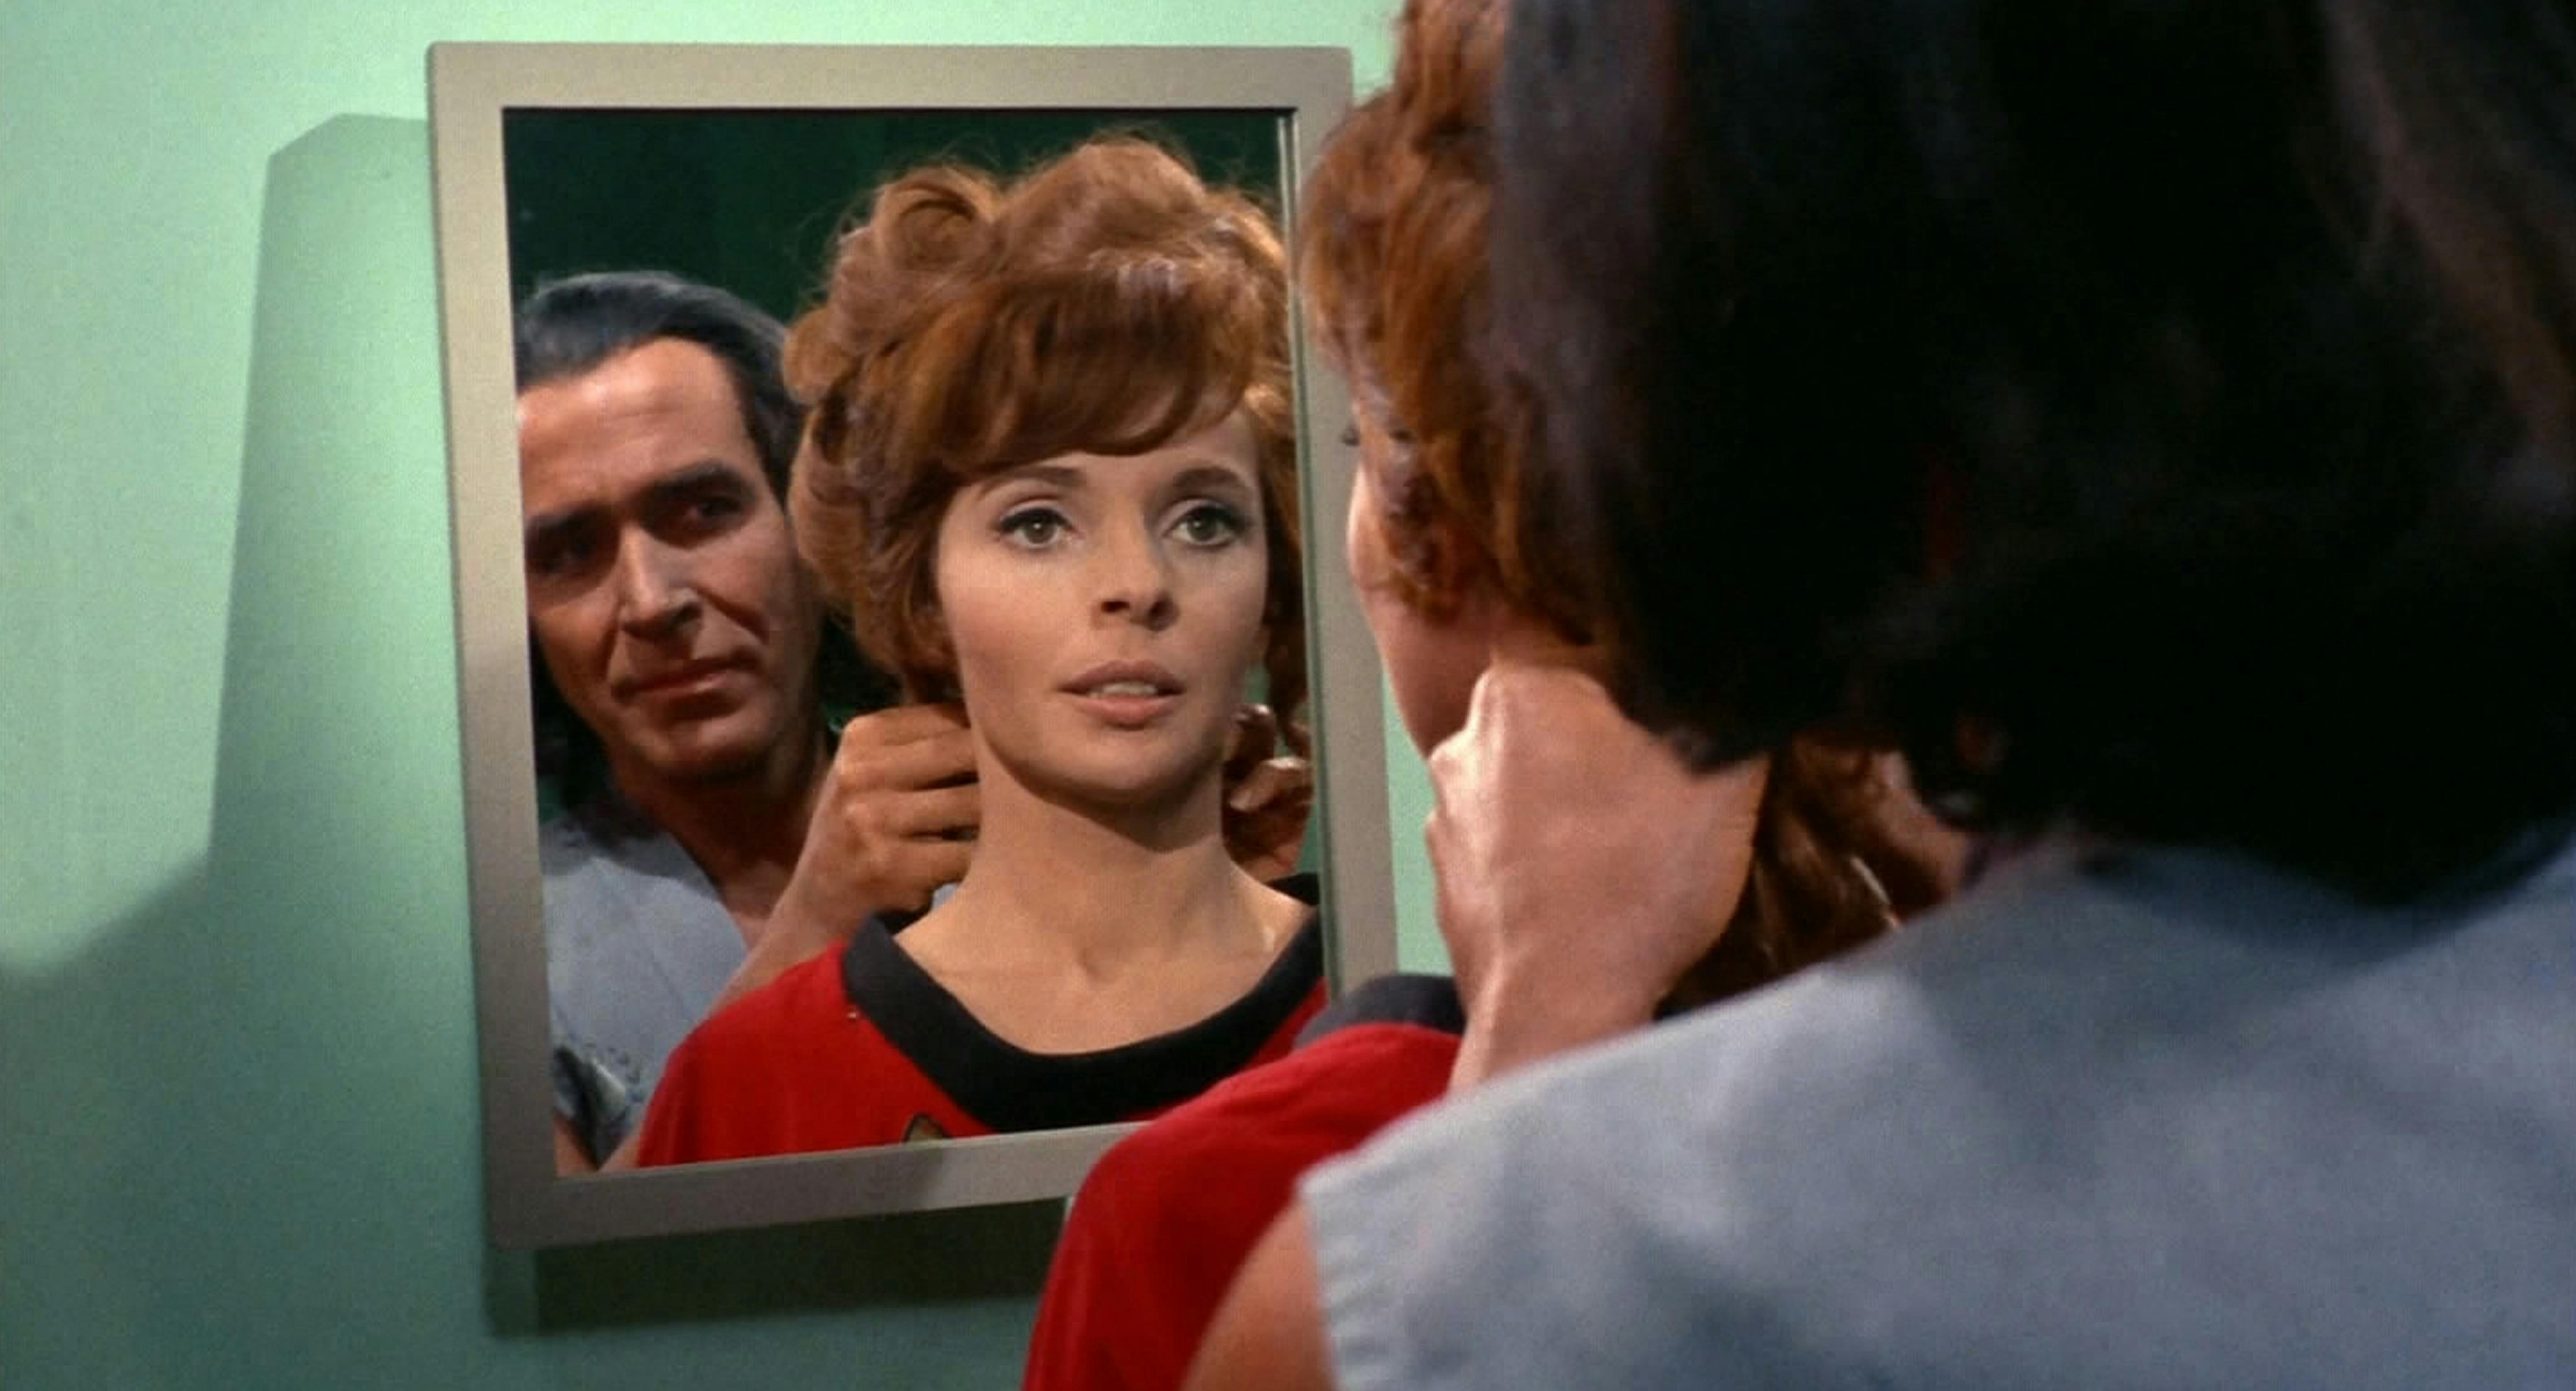 Khan stands behind Marla McGivers as they look at their reflection in the mirror on Space Seed